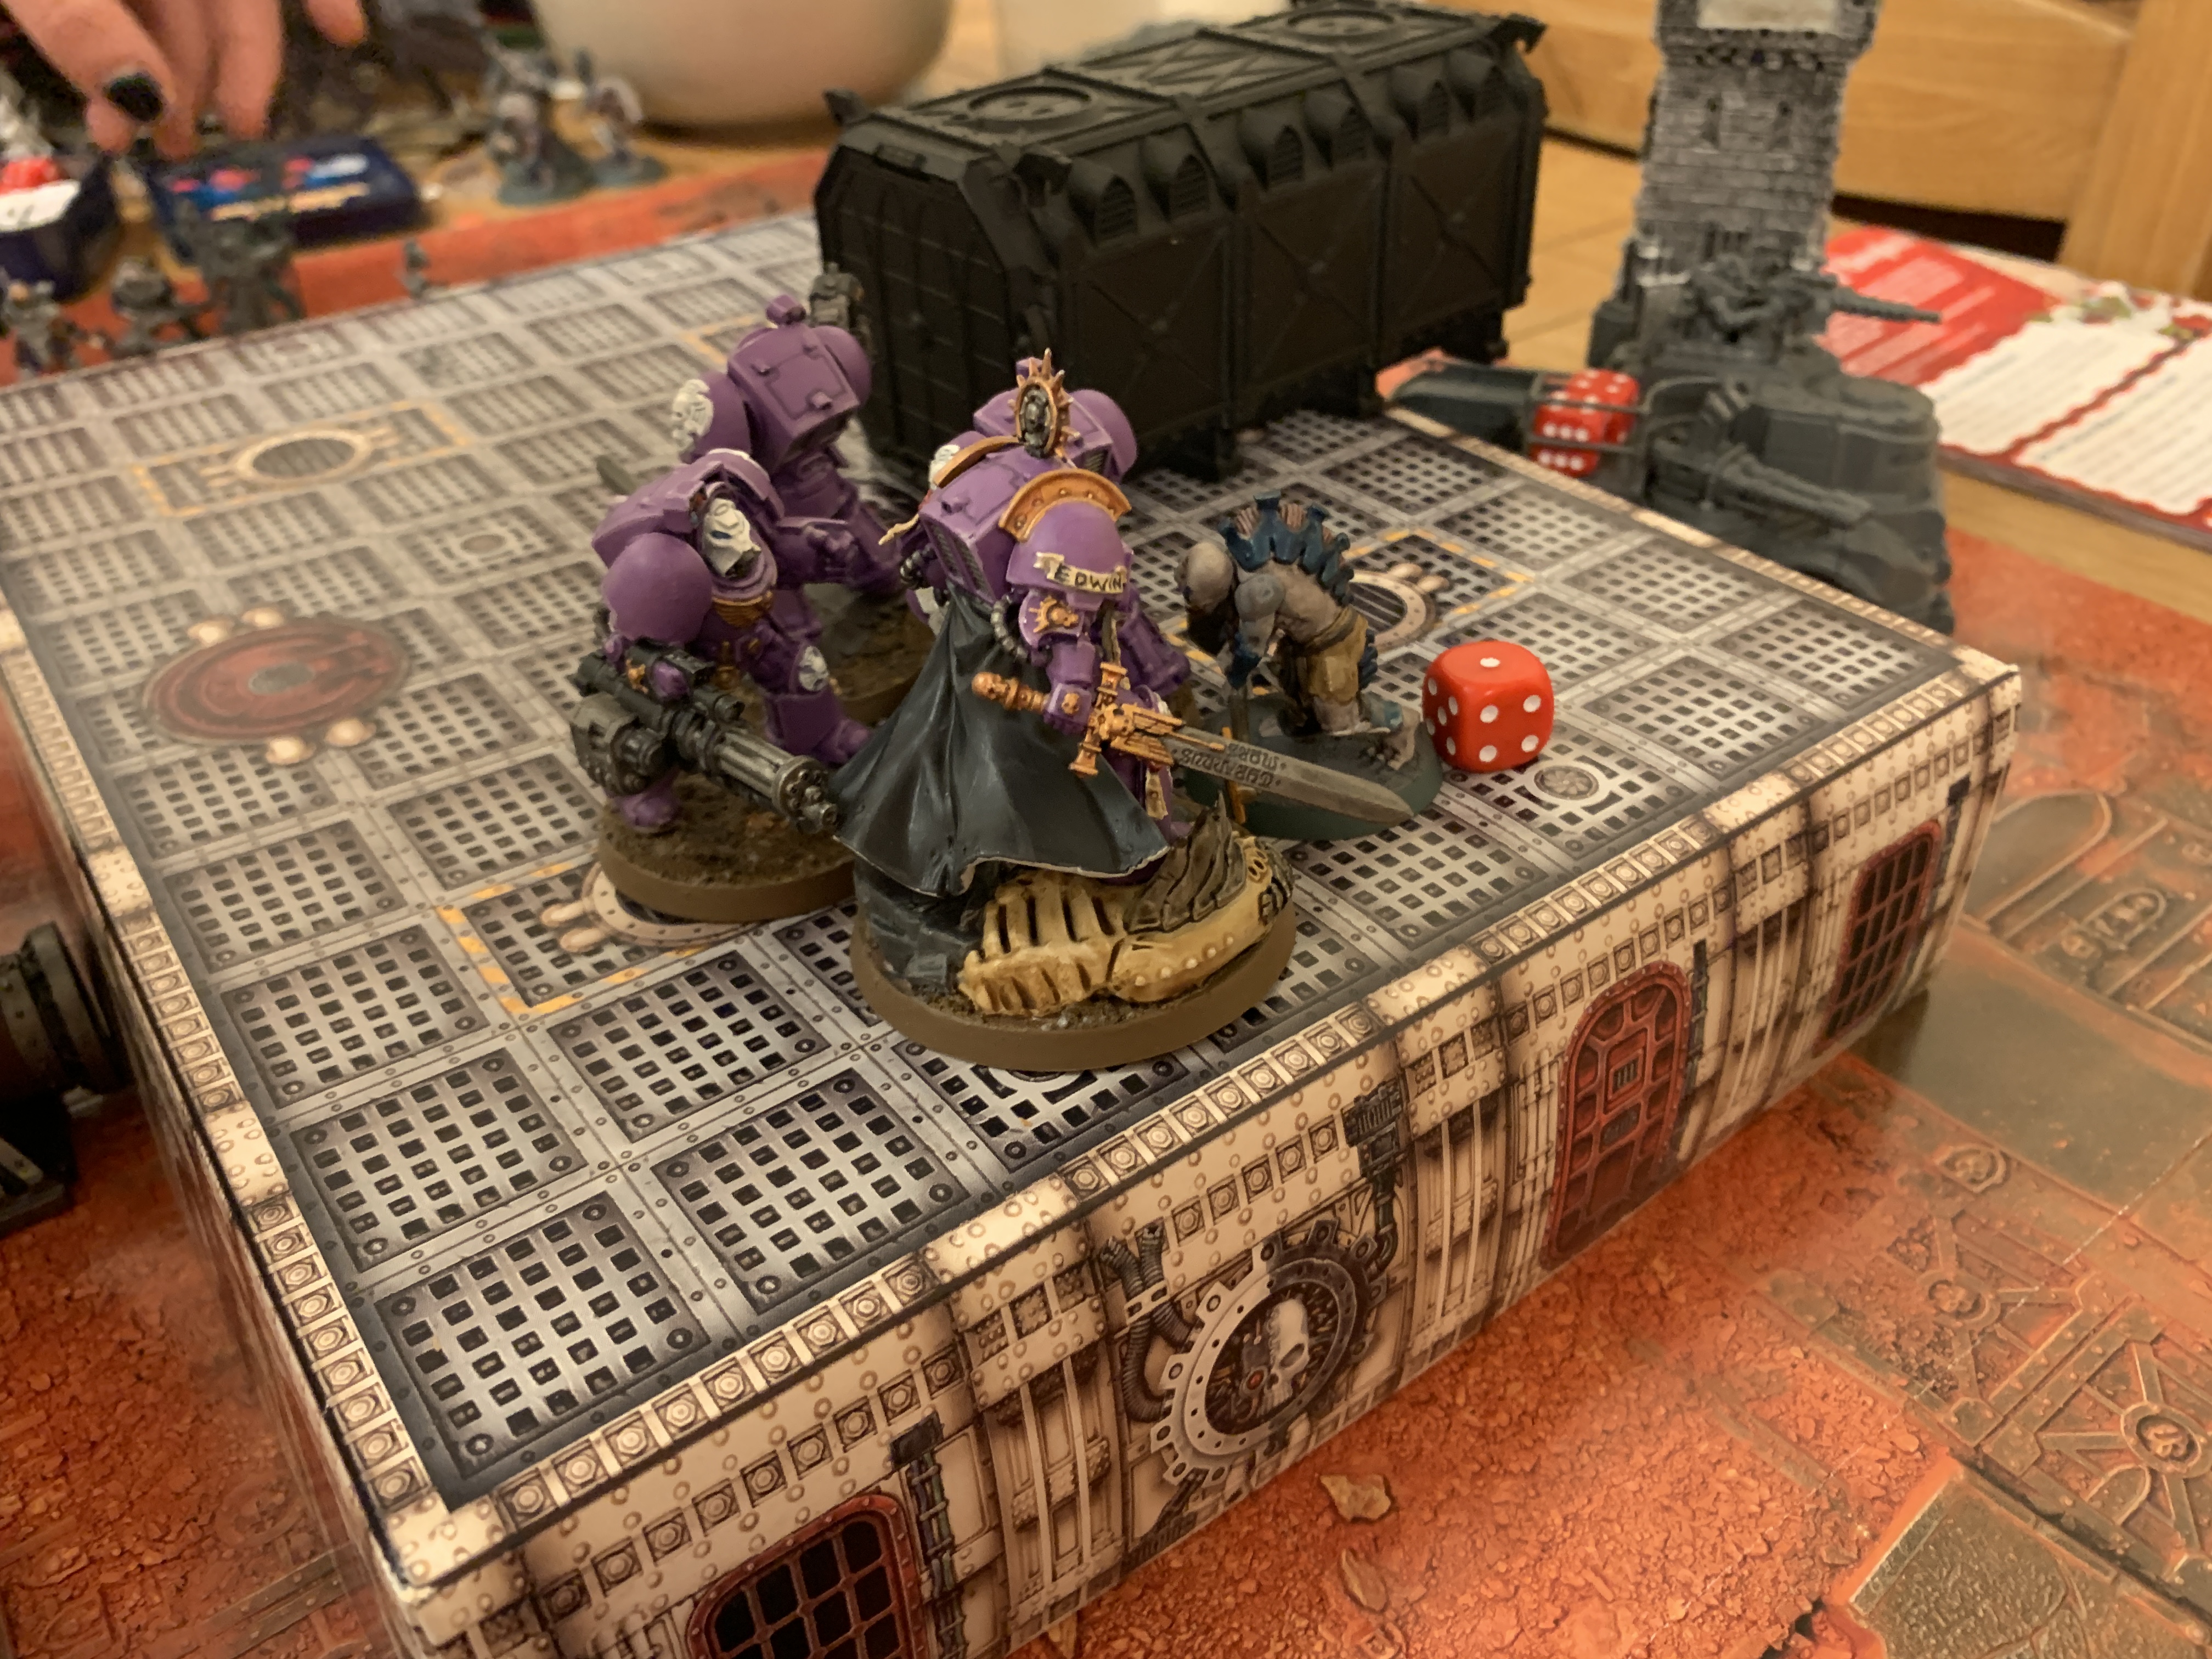 Four purple Space Marines stood on a boxy bit of terrain facing a single Aberrant. Off to the side of the terrain is an unpainted truck. In the background is a large group of Neophyte Hybrids